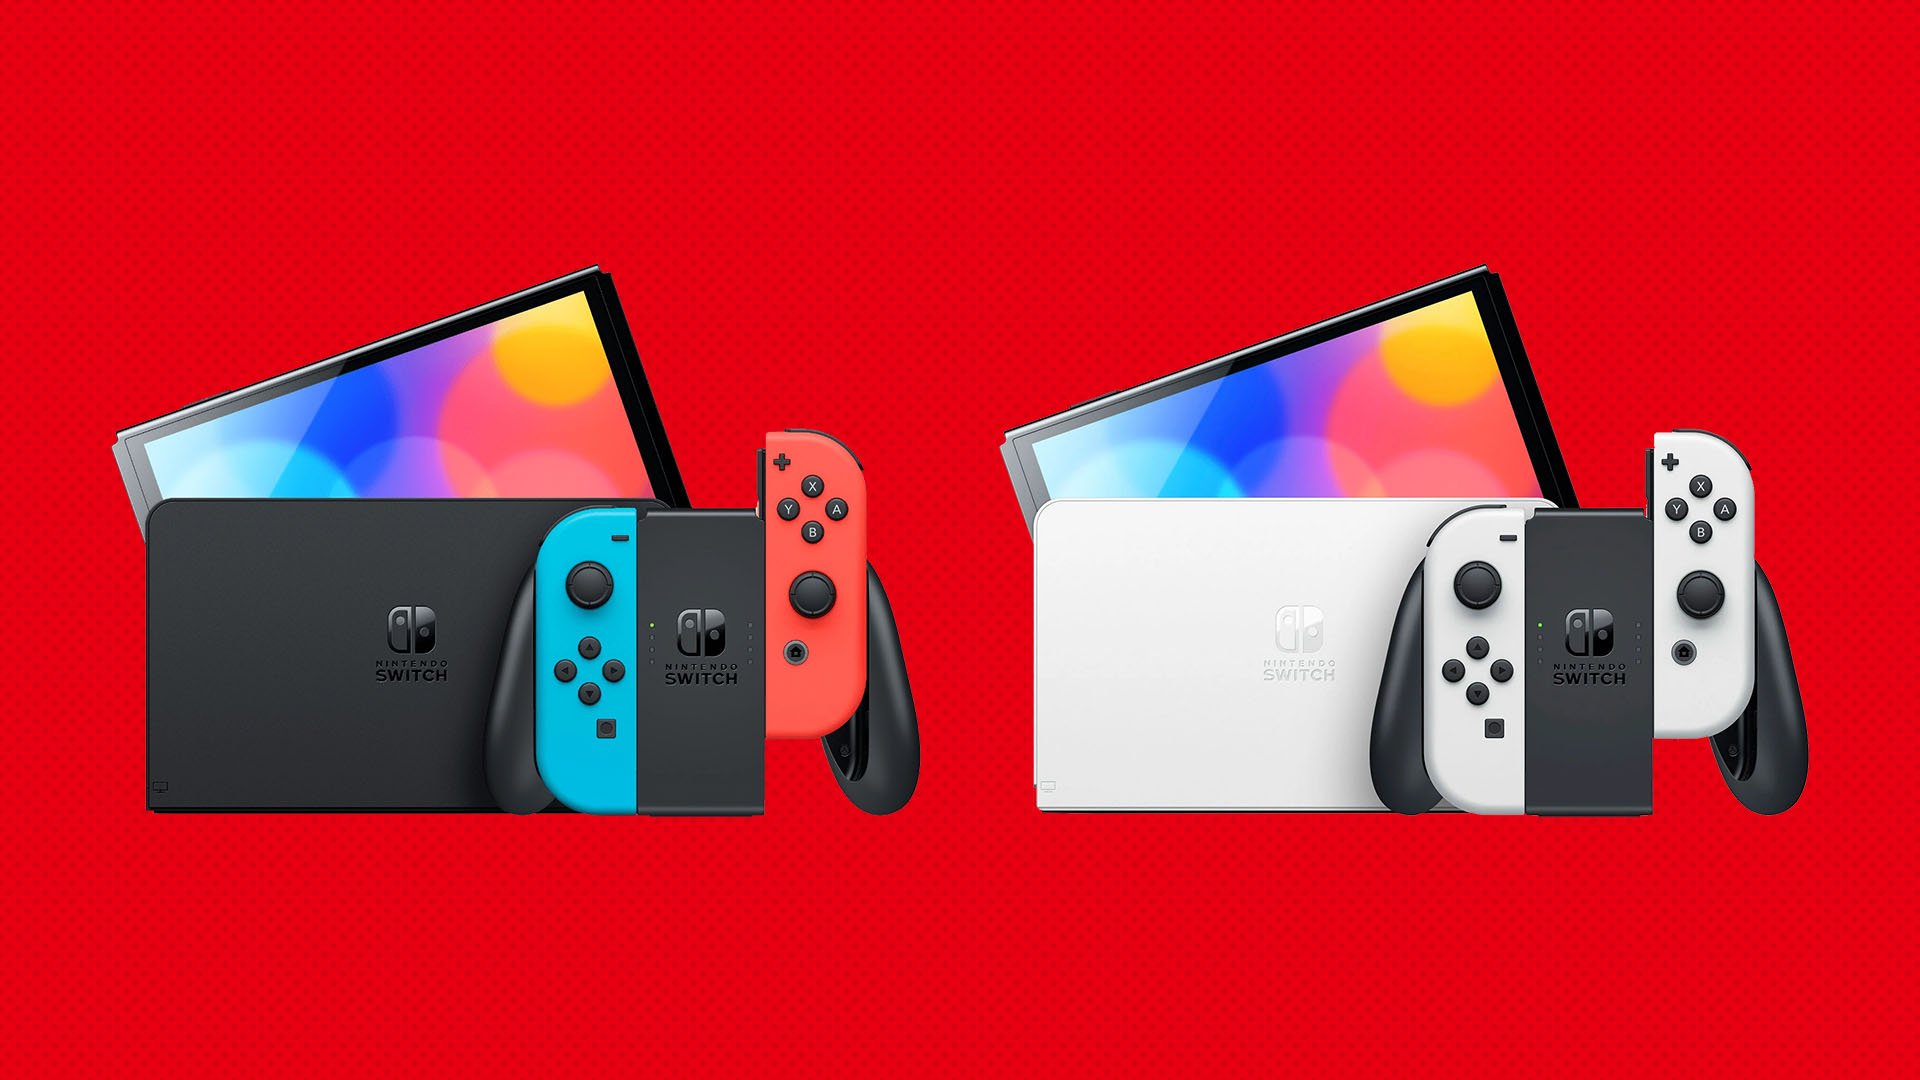 Nintendo Switch Sales Have Beaten Wii U Worldwide In Less Than A Year –  NintendoSoup